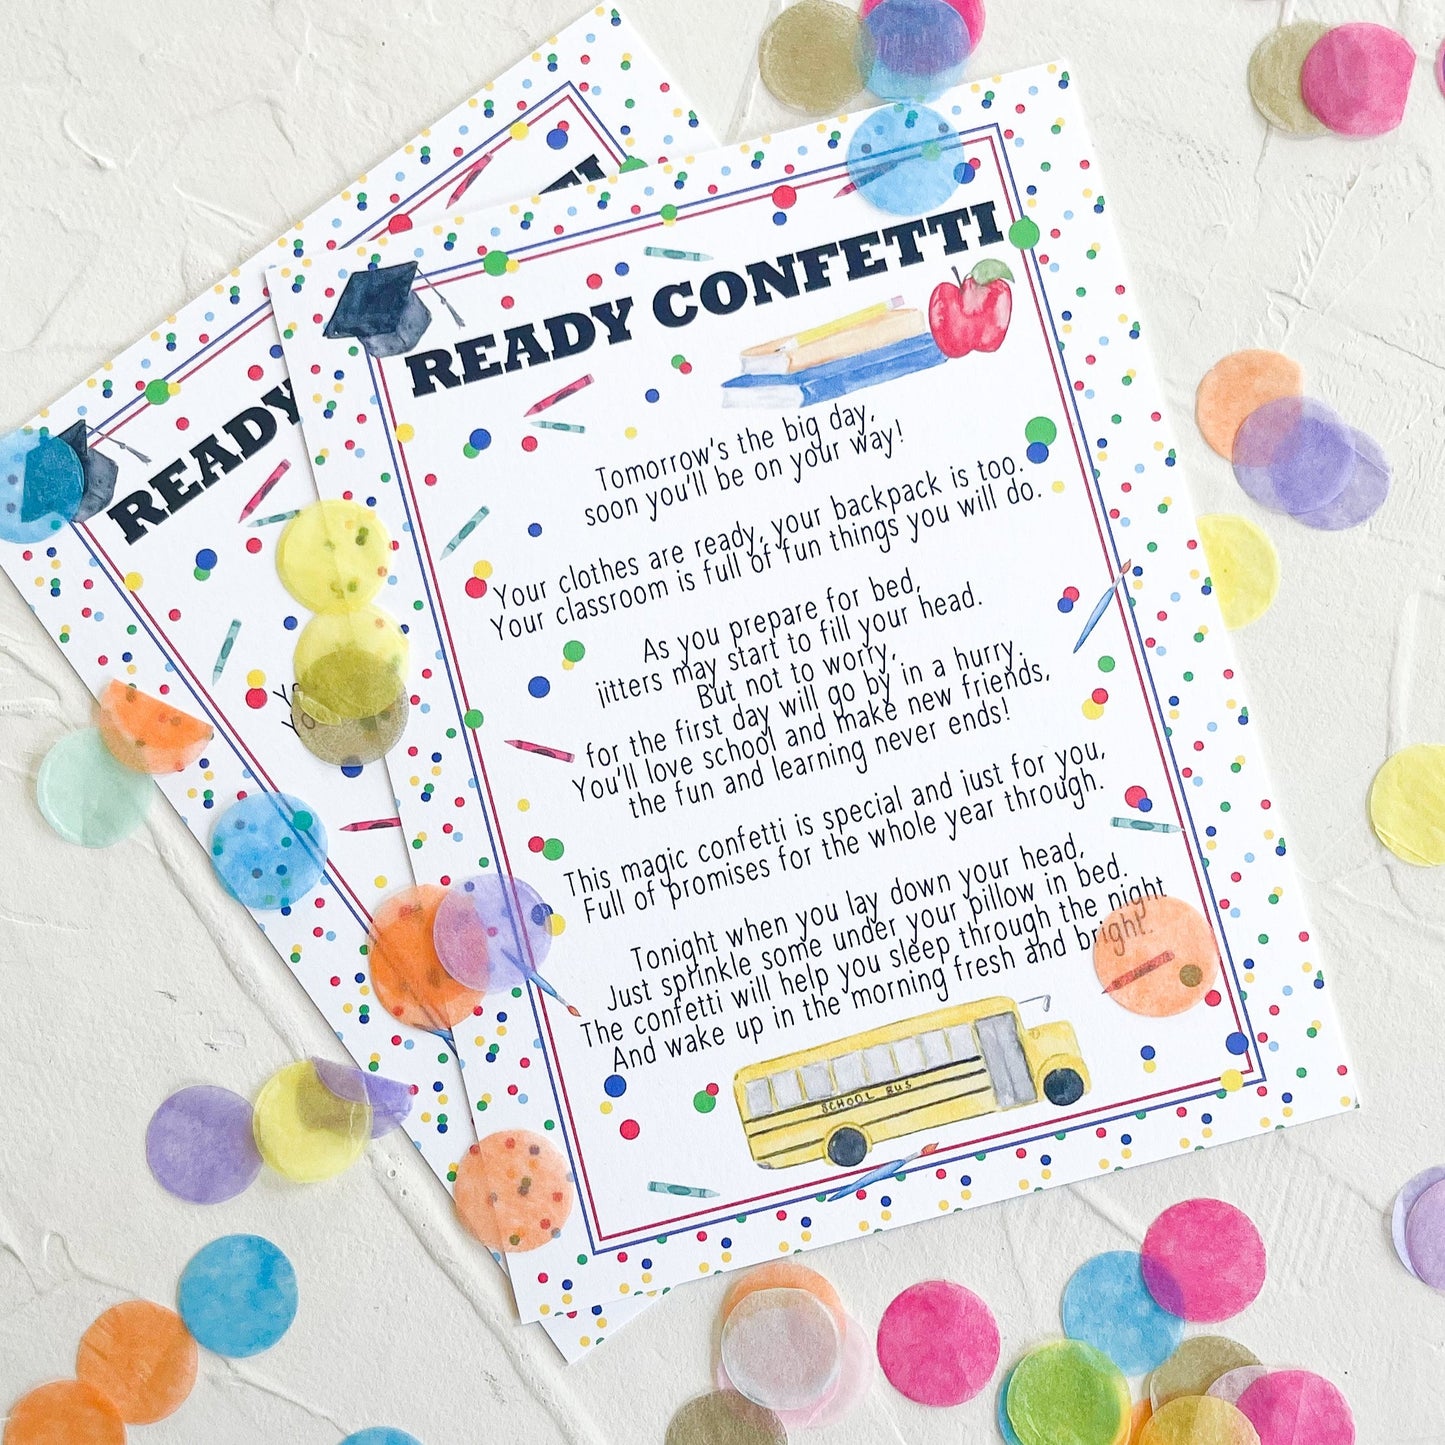 Back to School Ready Confetti, Jitter Glitter First Day of School Gift